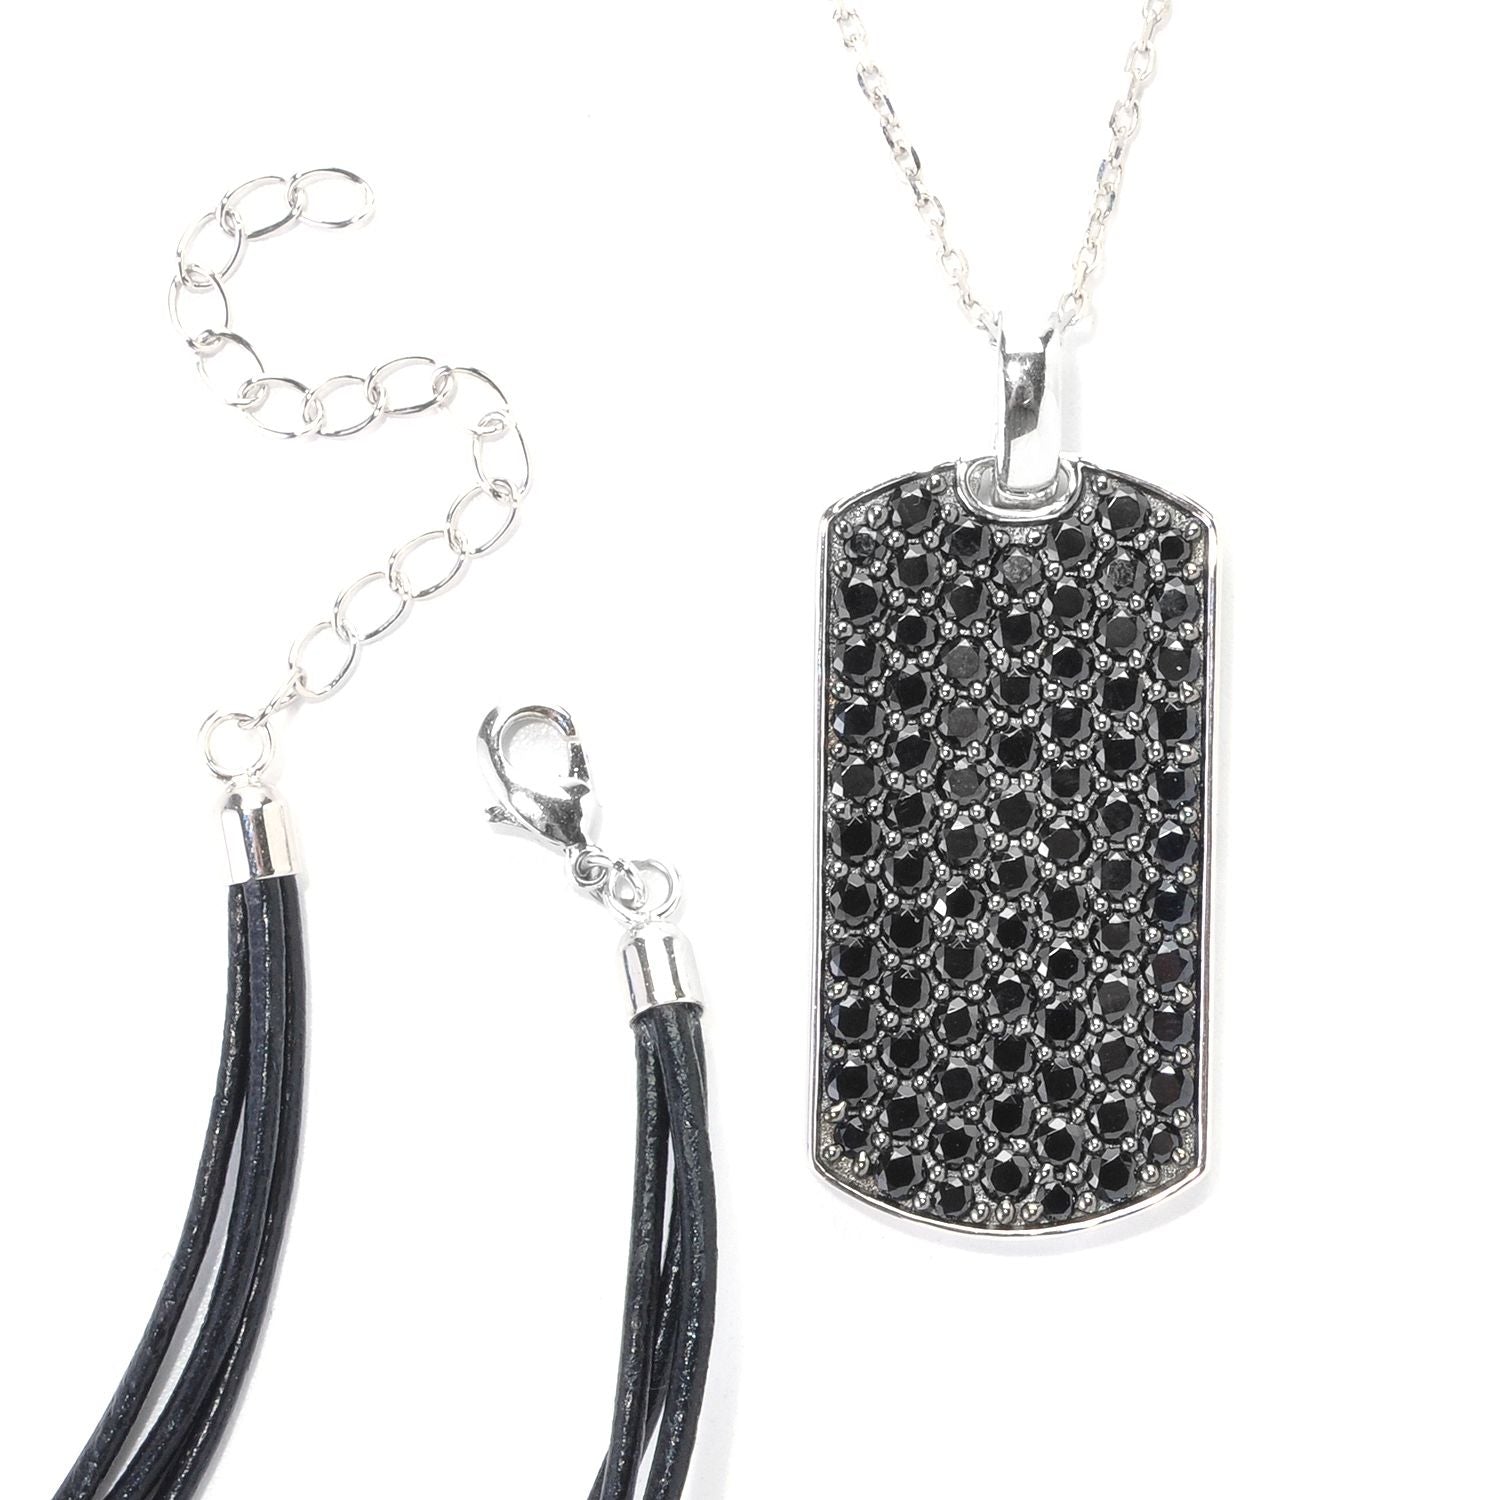 Sterling Silver Pave Black Spinel Necklace with Chain and Cord - Pinctore